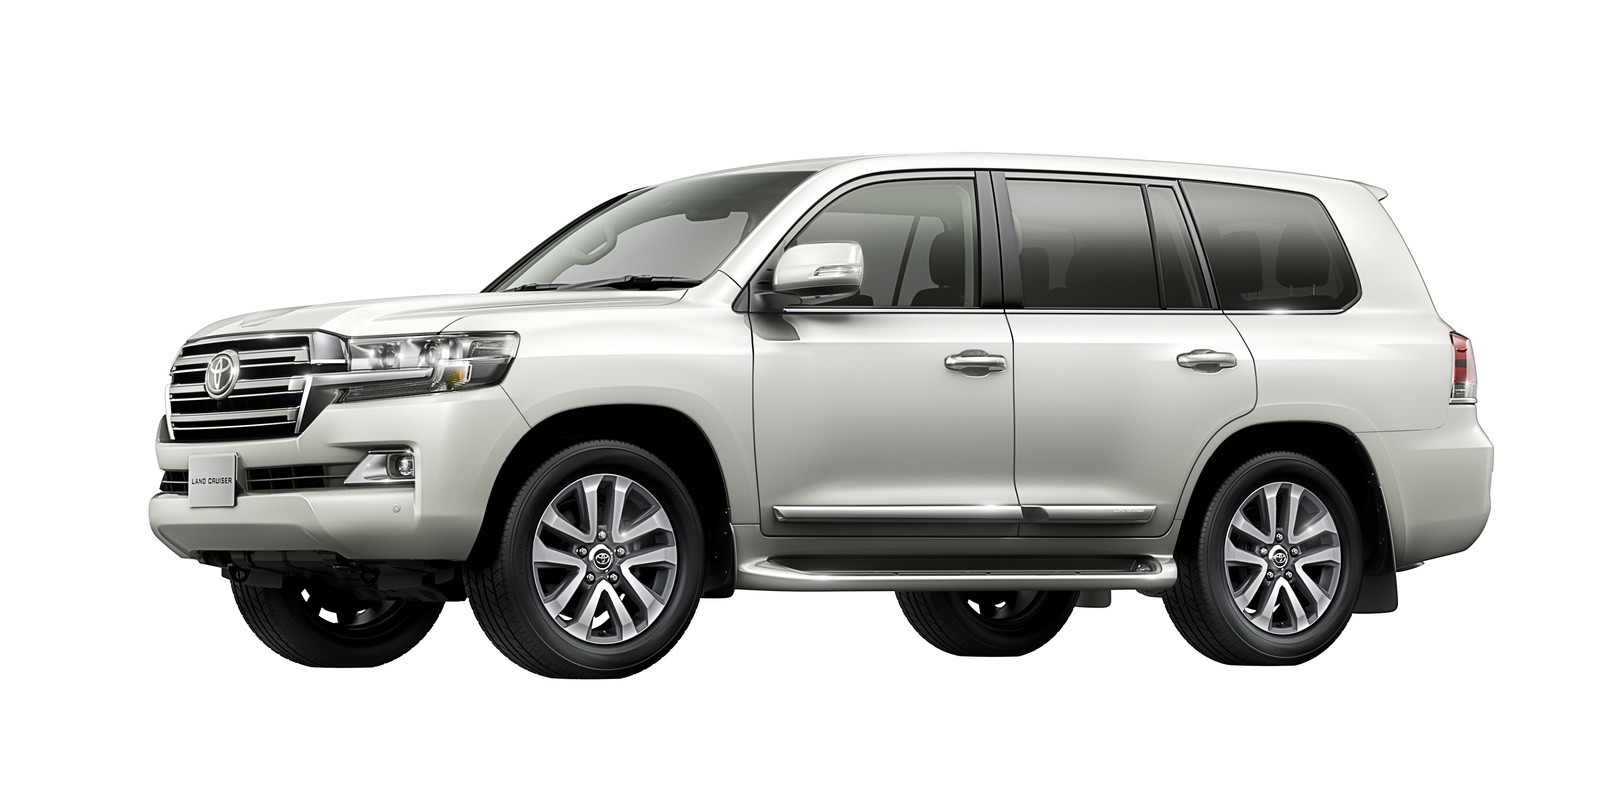 Land Cruiser V8 2022 Price In Pakistan Picture And Specs